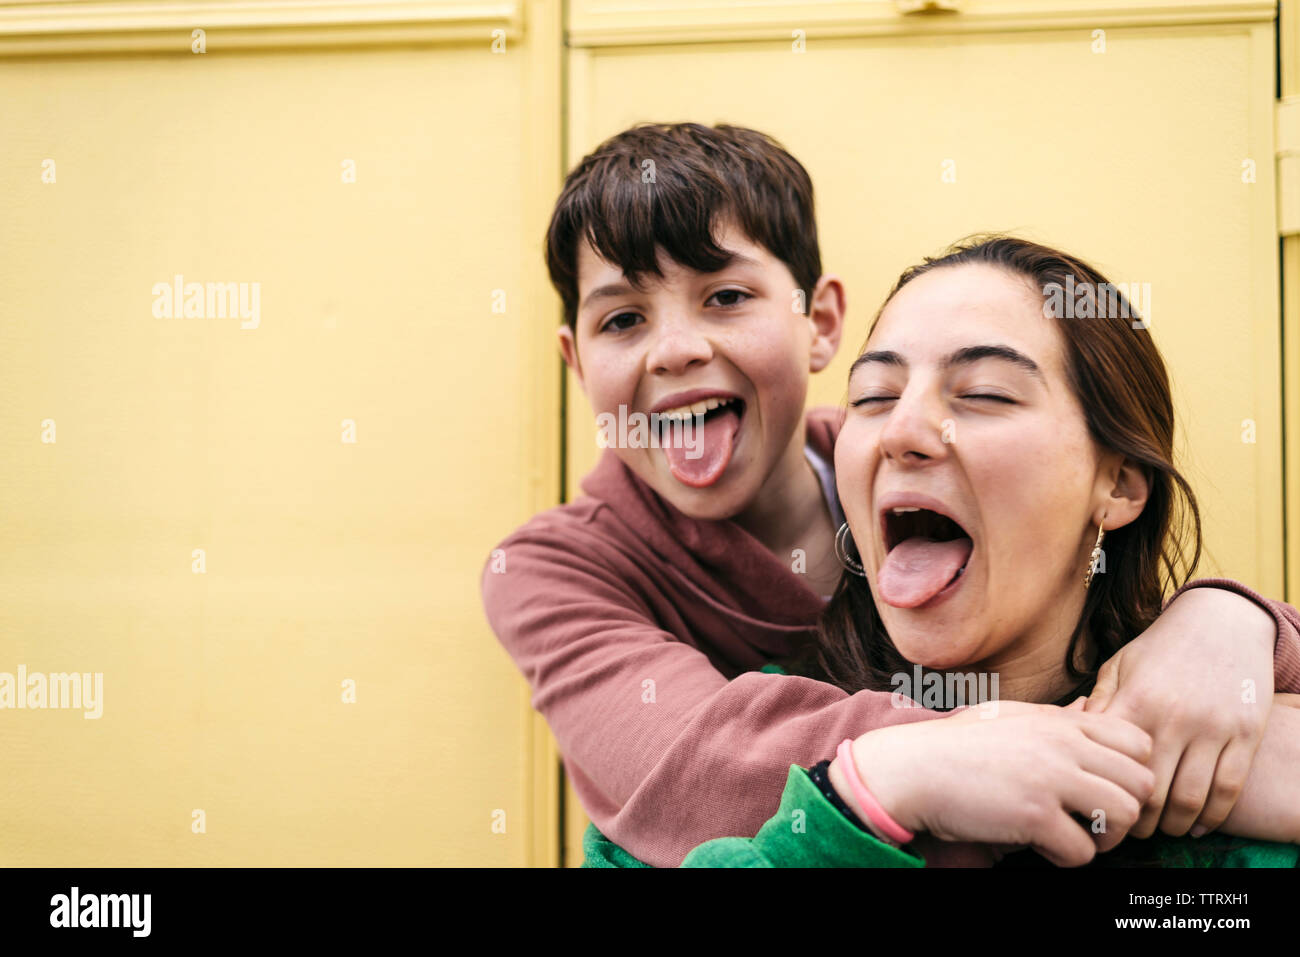 Portrait of teenagers showing the tongue while sitting outdoors Stock Photo